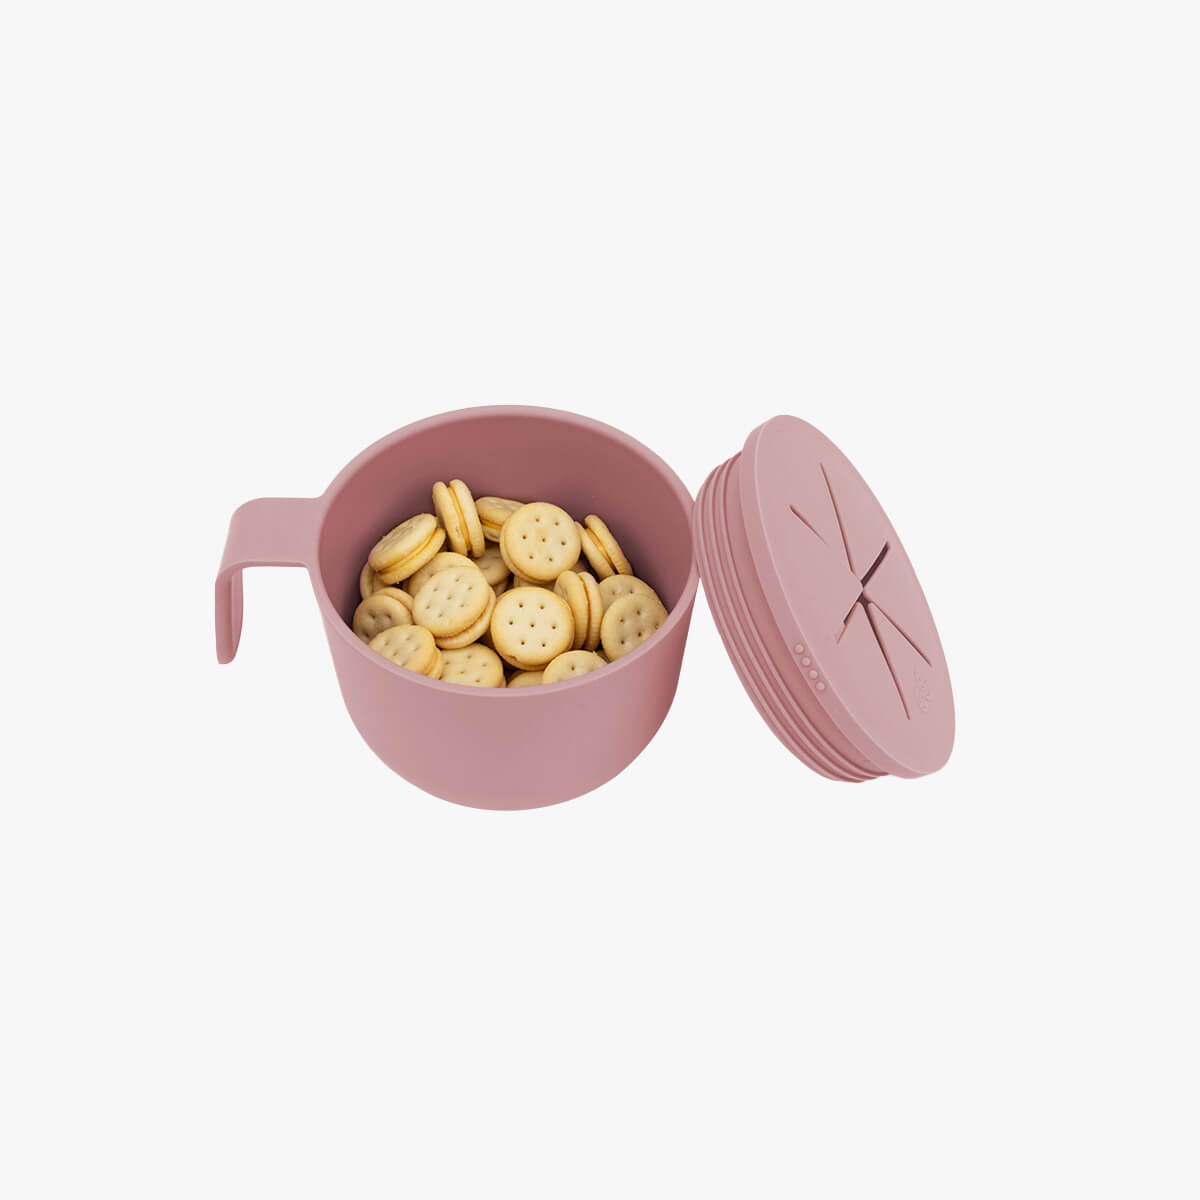 Snack Bowl Lid in Blush / ezpz Basics Line / Silicone Cutout Bowl Lid for Kids